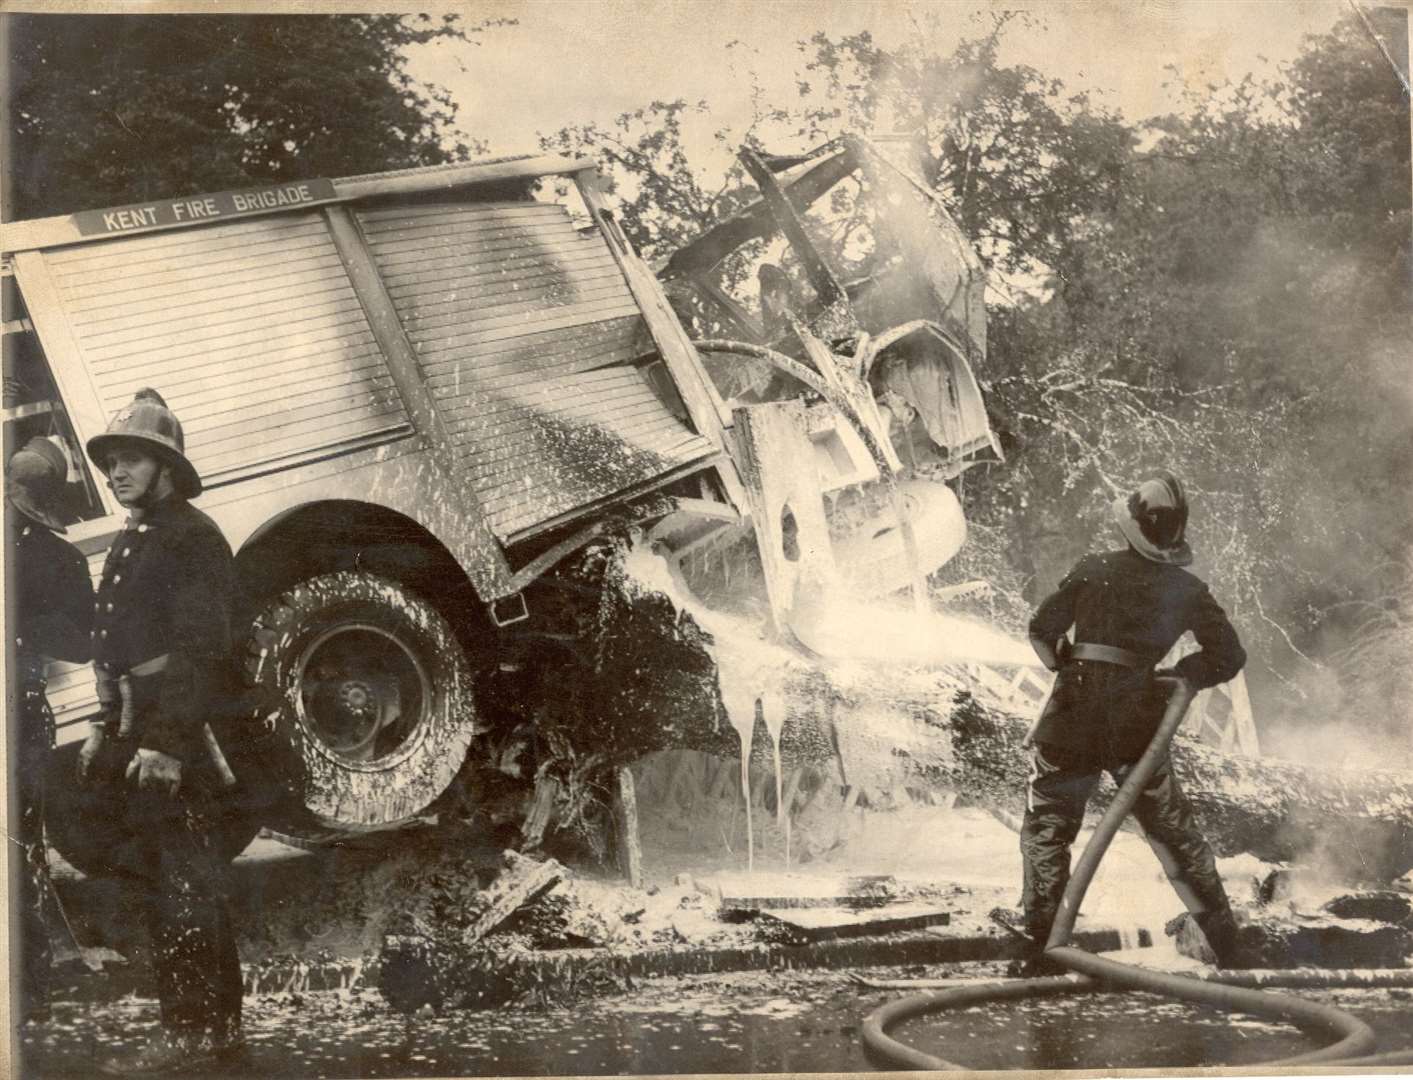 The fire tender crash in College Road, Maidstone, in September, 1970